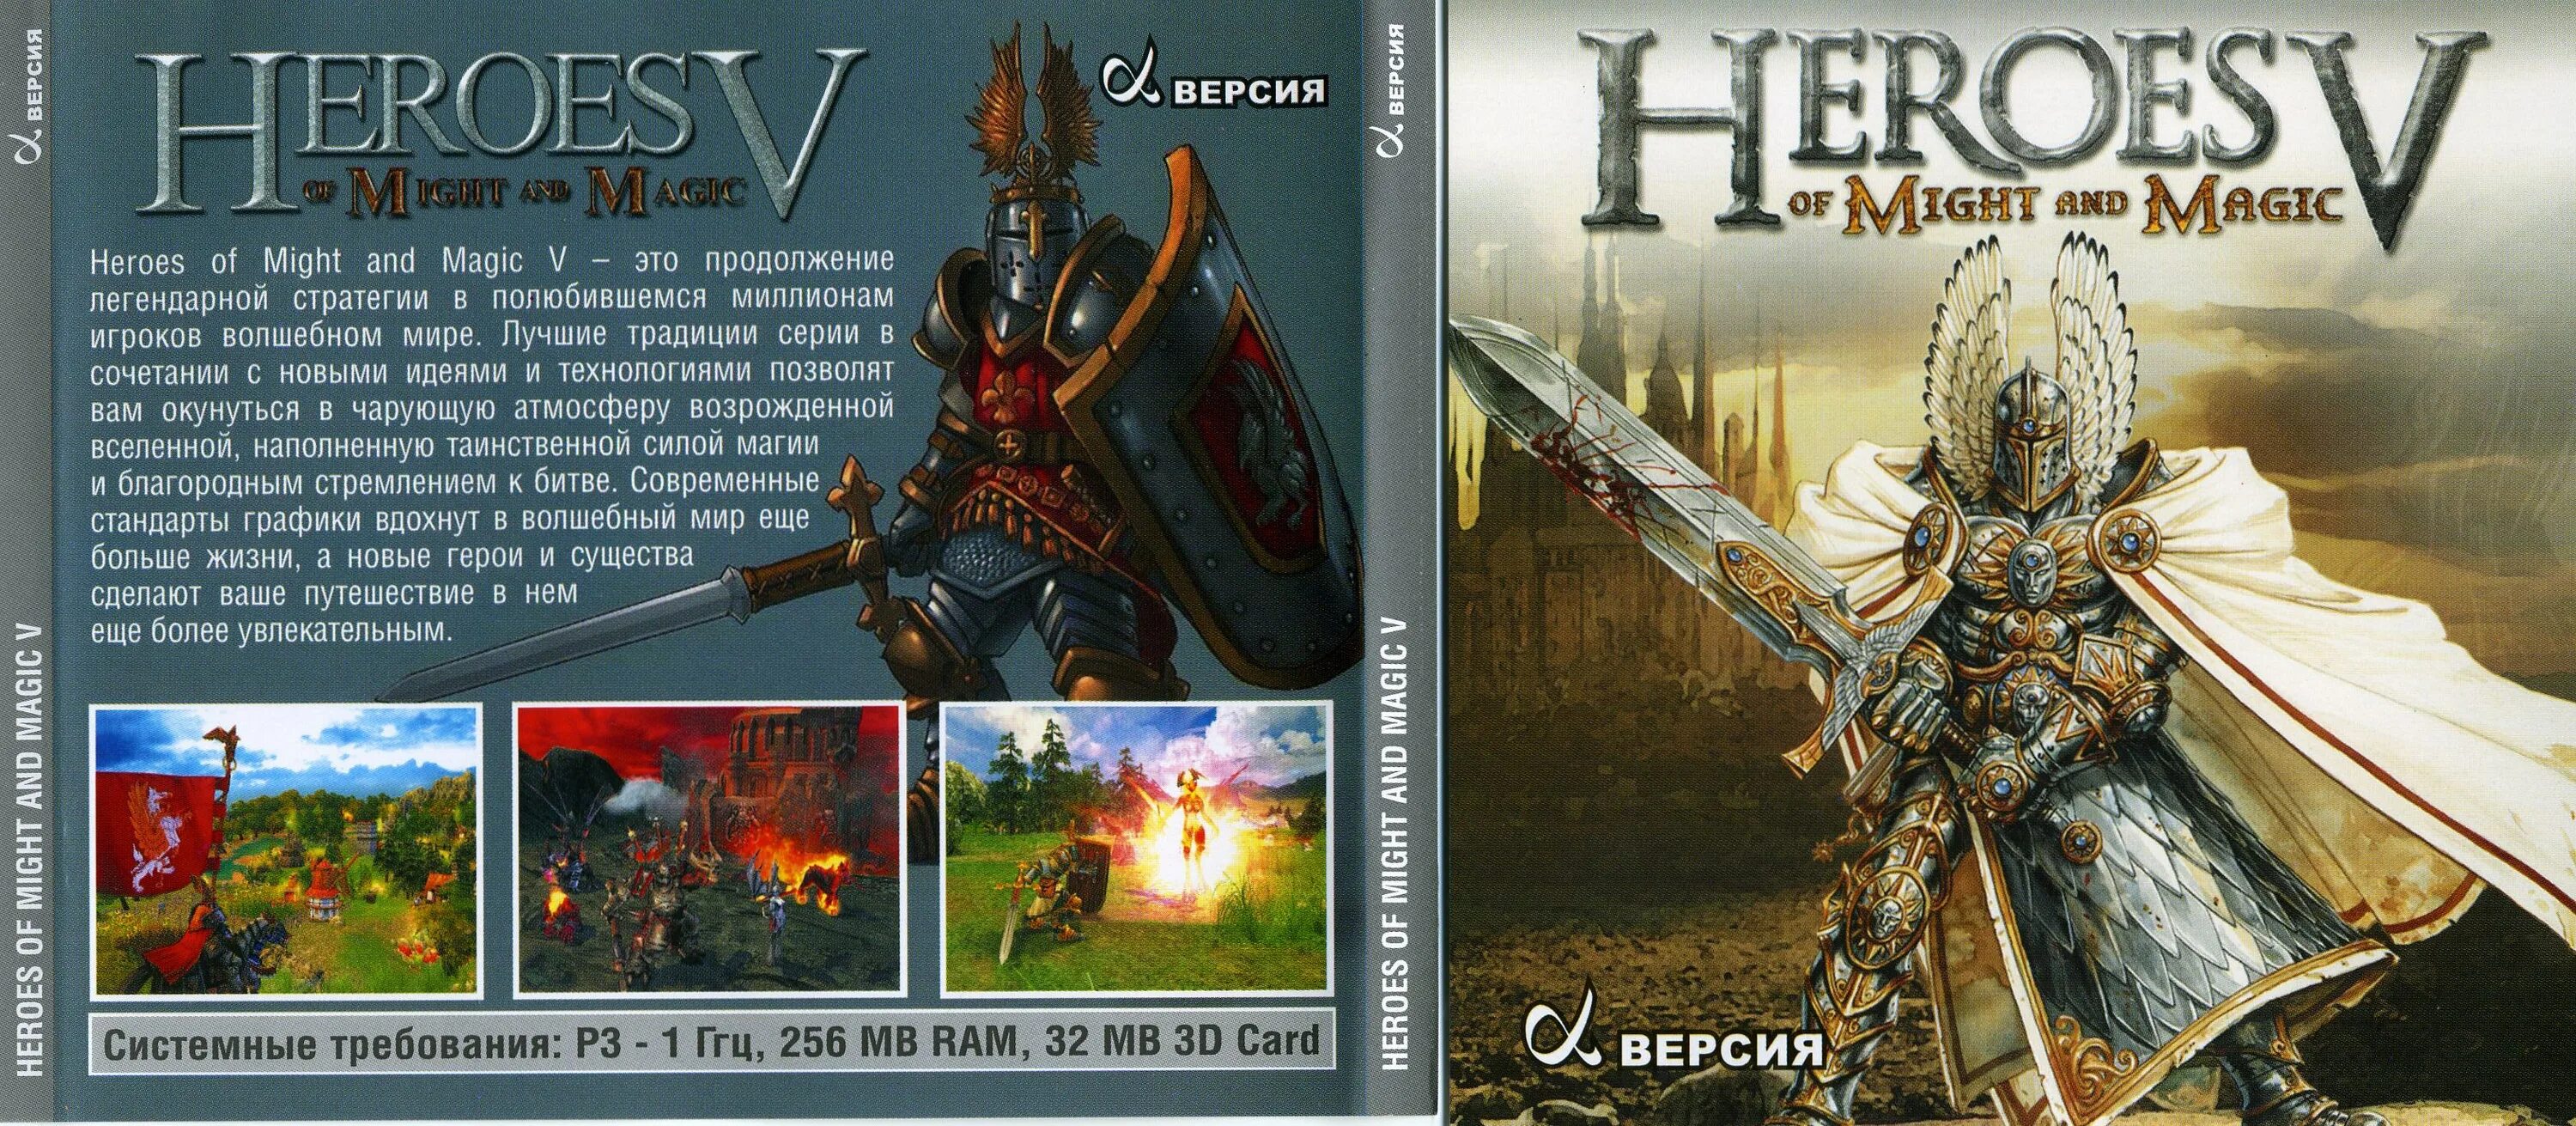 Heroes of might and magic gold. Heroes of might and Magic v диск. Heroes of might and Magic диск. Heroes of might and Magic 5 обложка. Heroes of might and Magic 5 диск.